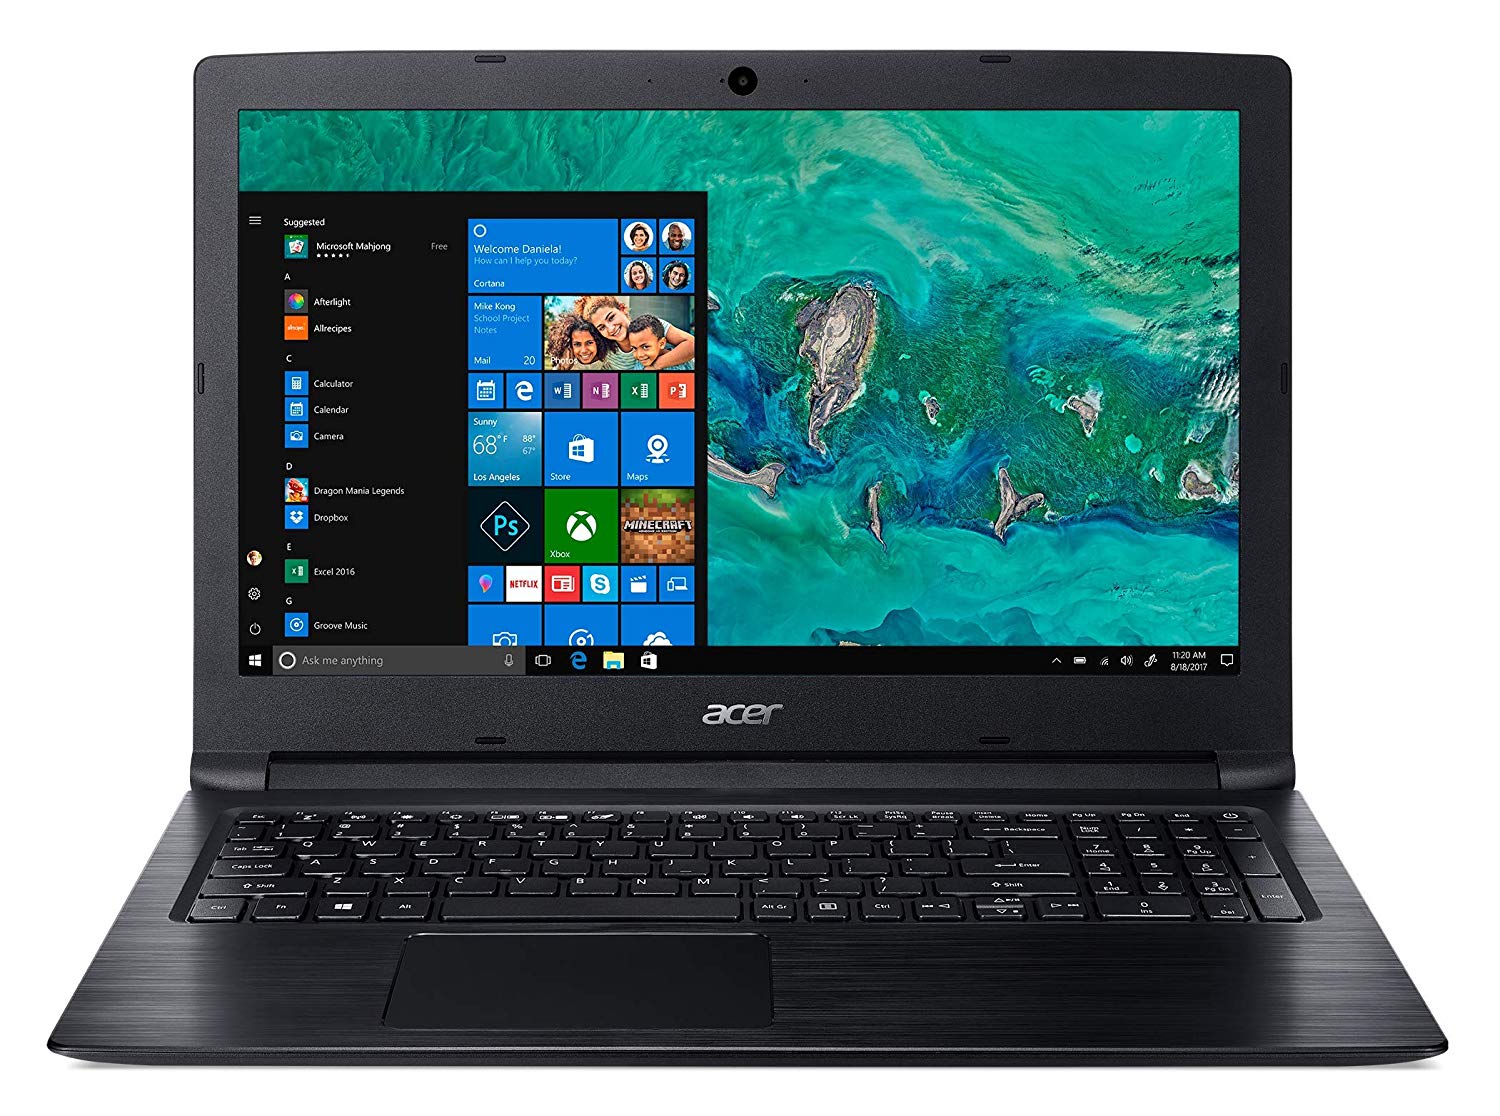 How To Screenshot On An Acer Laptop